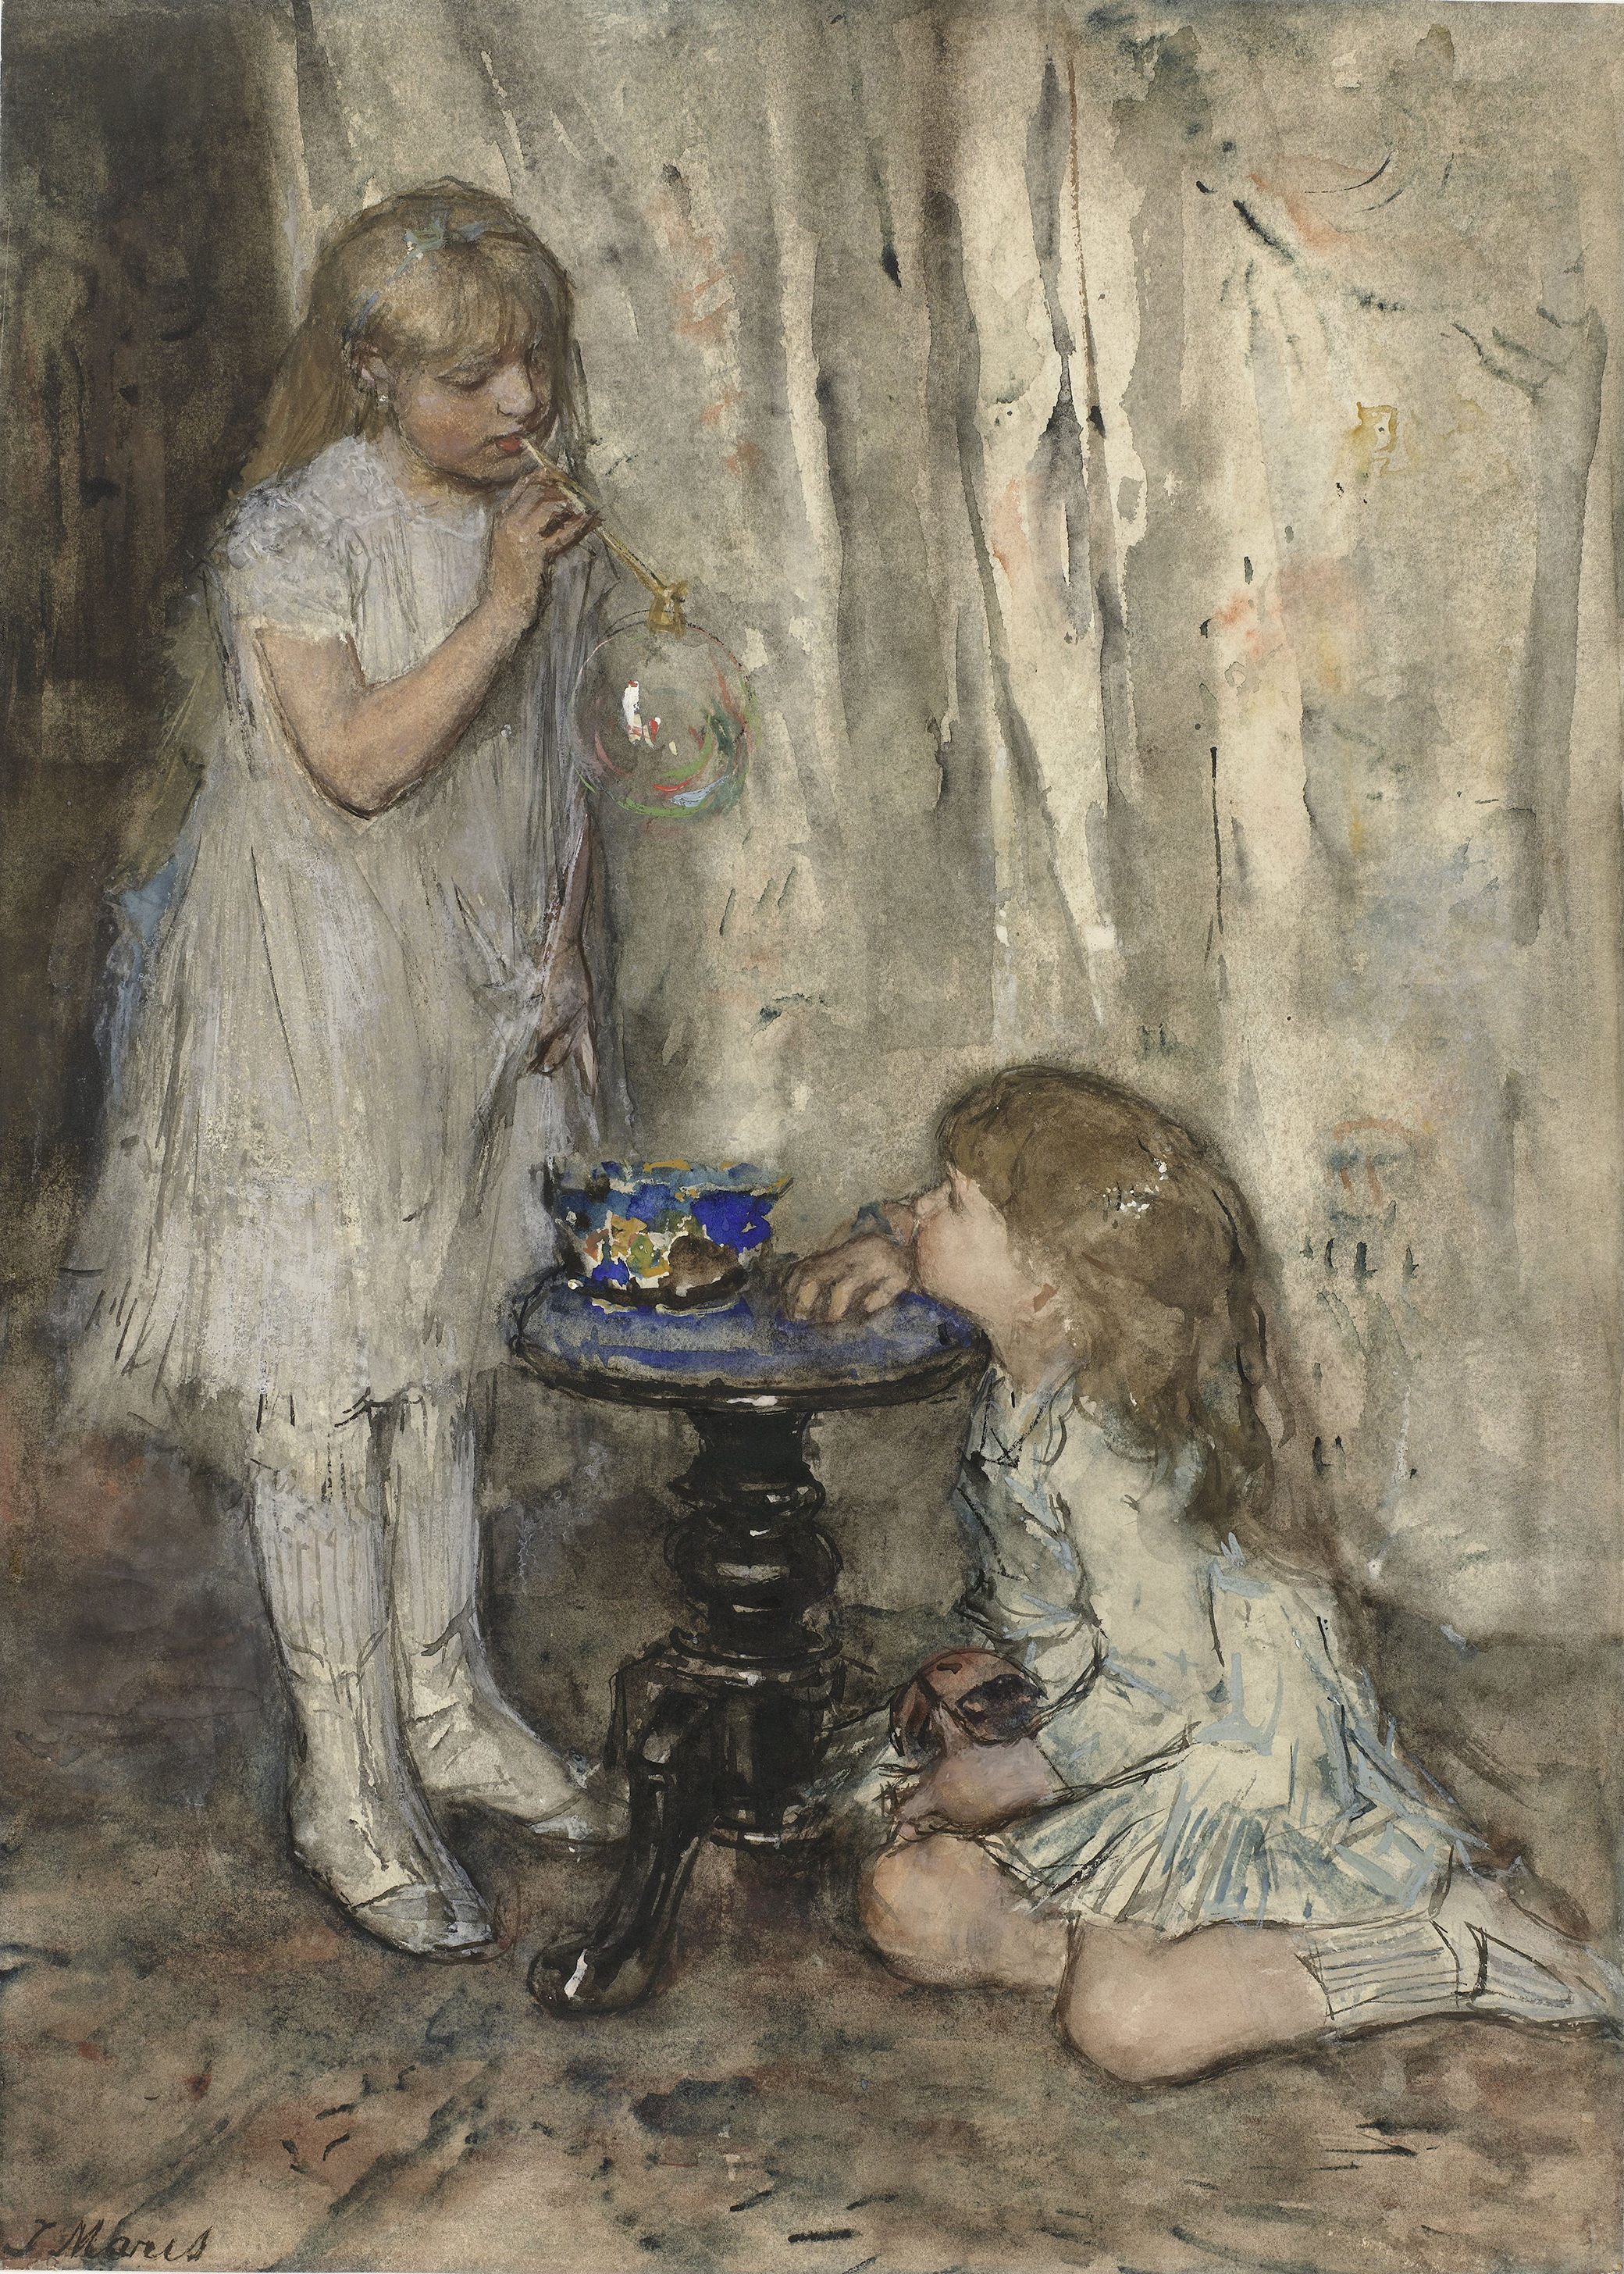 Two Girls Blowing Bubbles, by Jacob Maris, c. 1880.